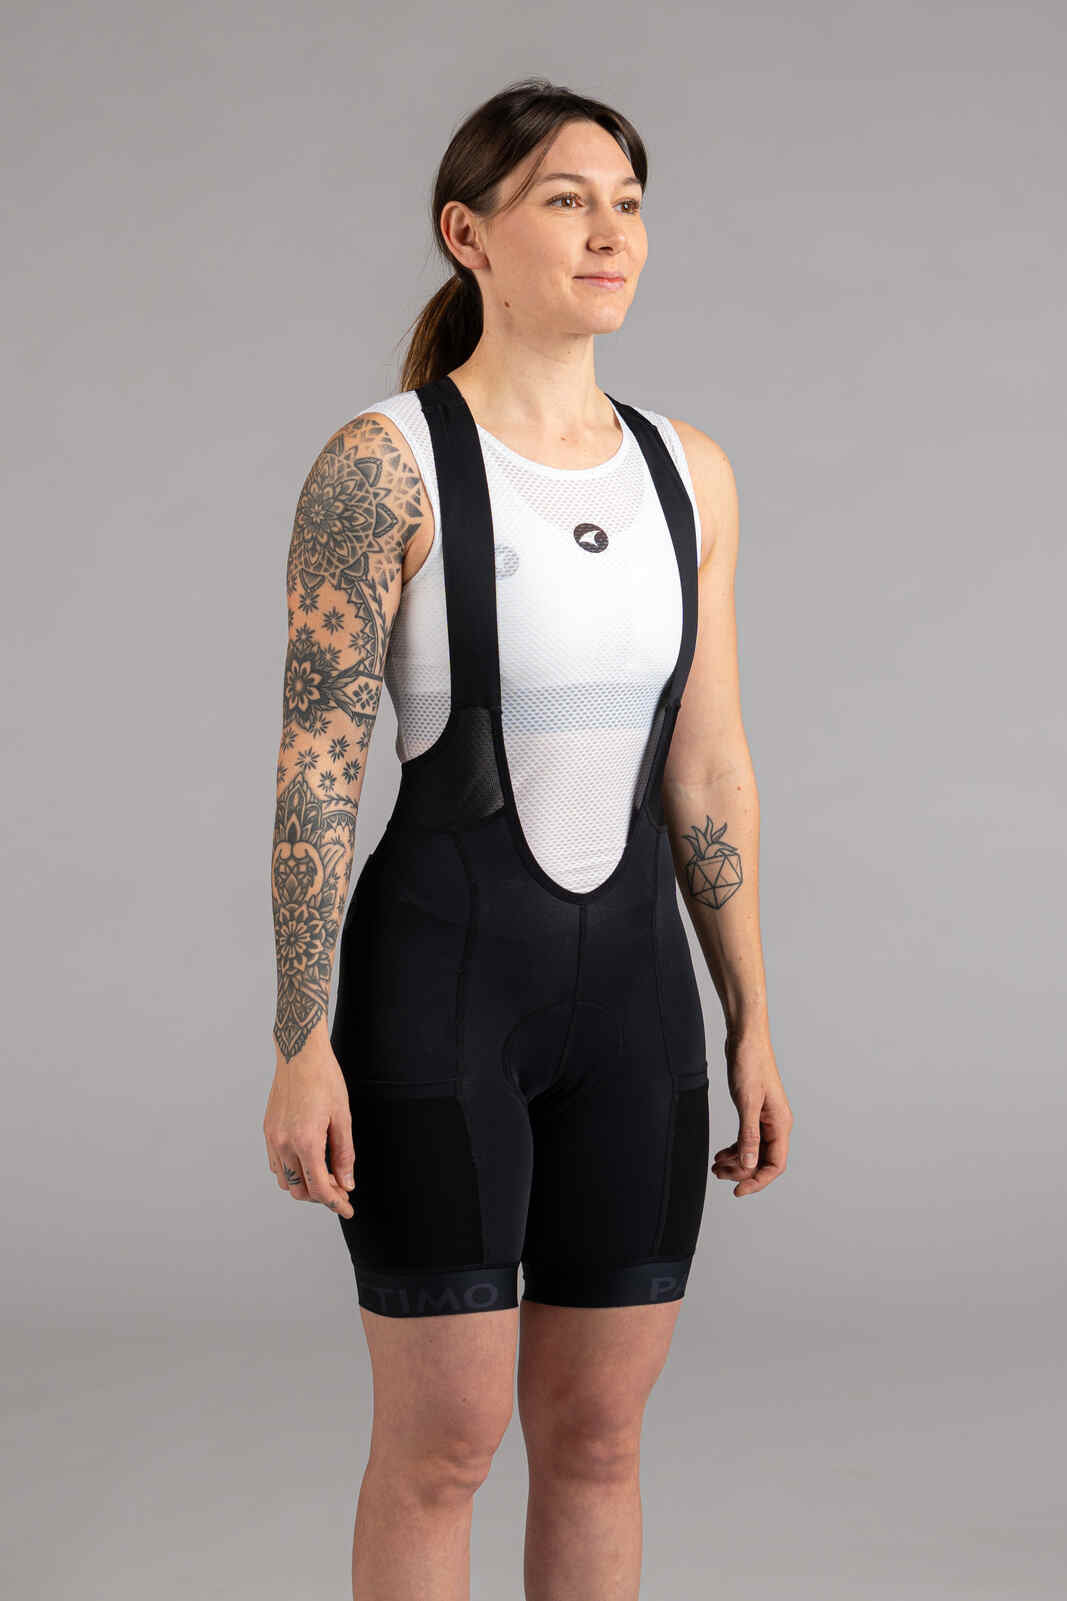 Women's Bib Shorts with Pockets - Front View